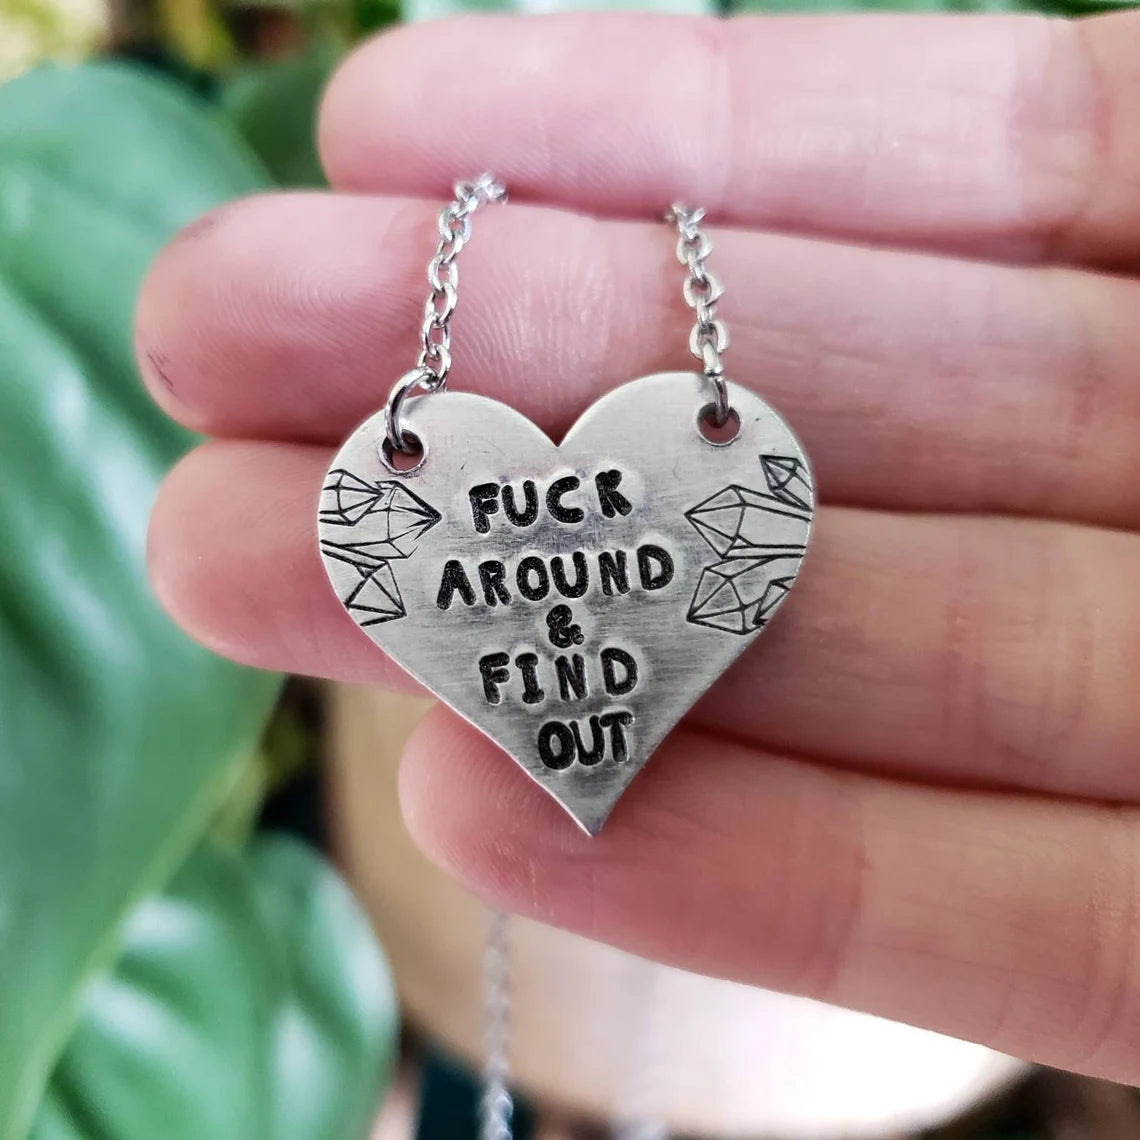 F*ck around and find out necklace